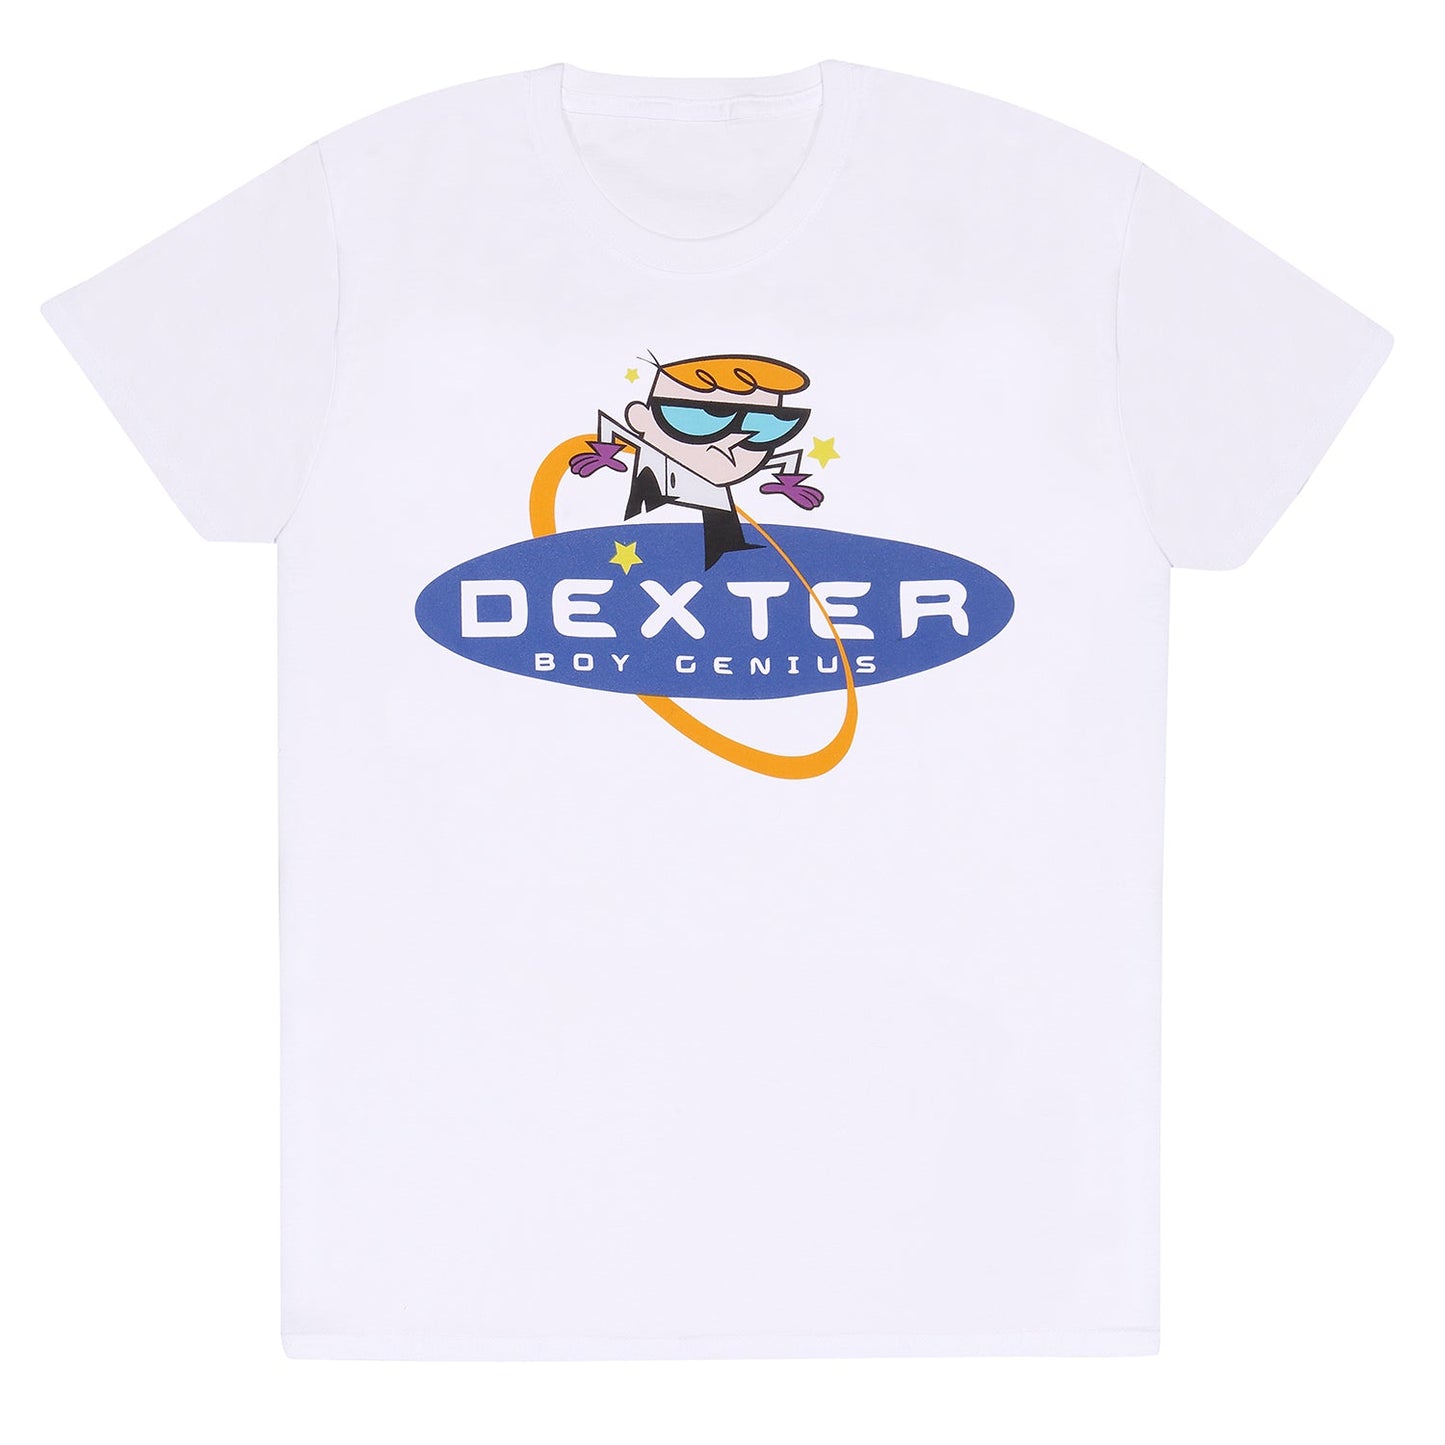 Retro Tees white short sleeve men's unisex t-shirt featuring 90s awesome Dexter boy genius cartoon graphics, officially licenced product